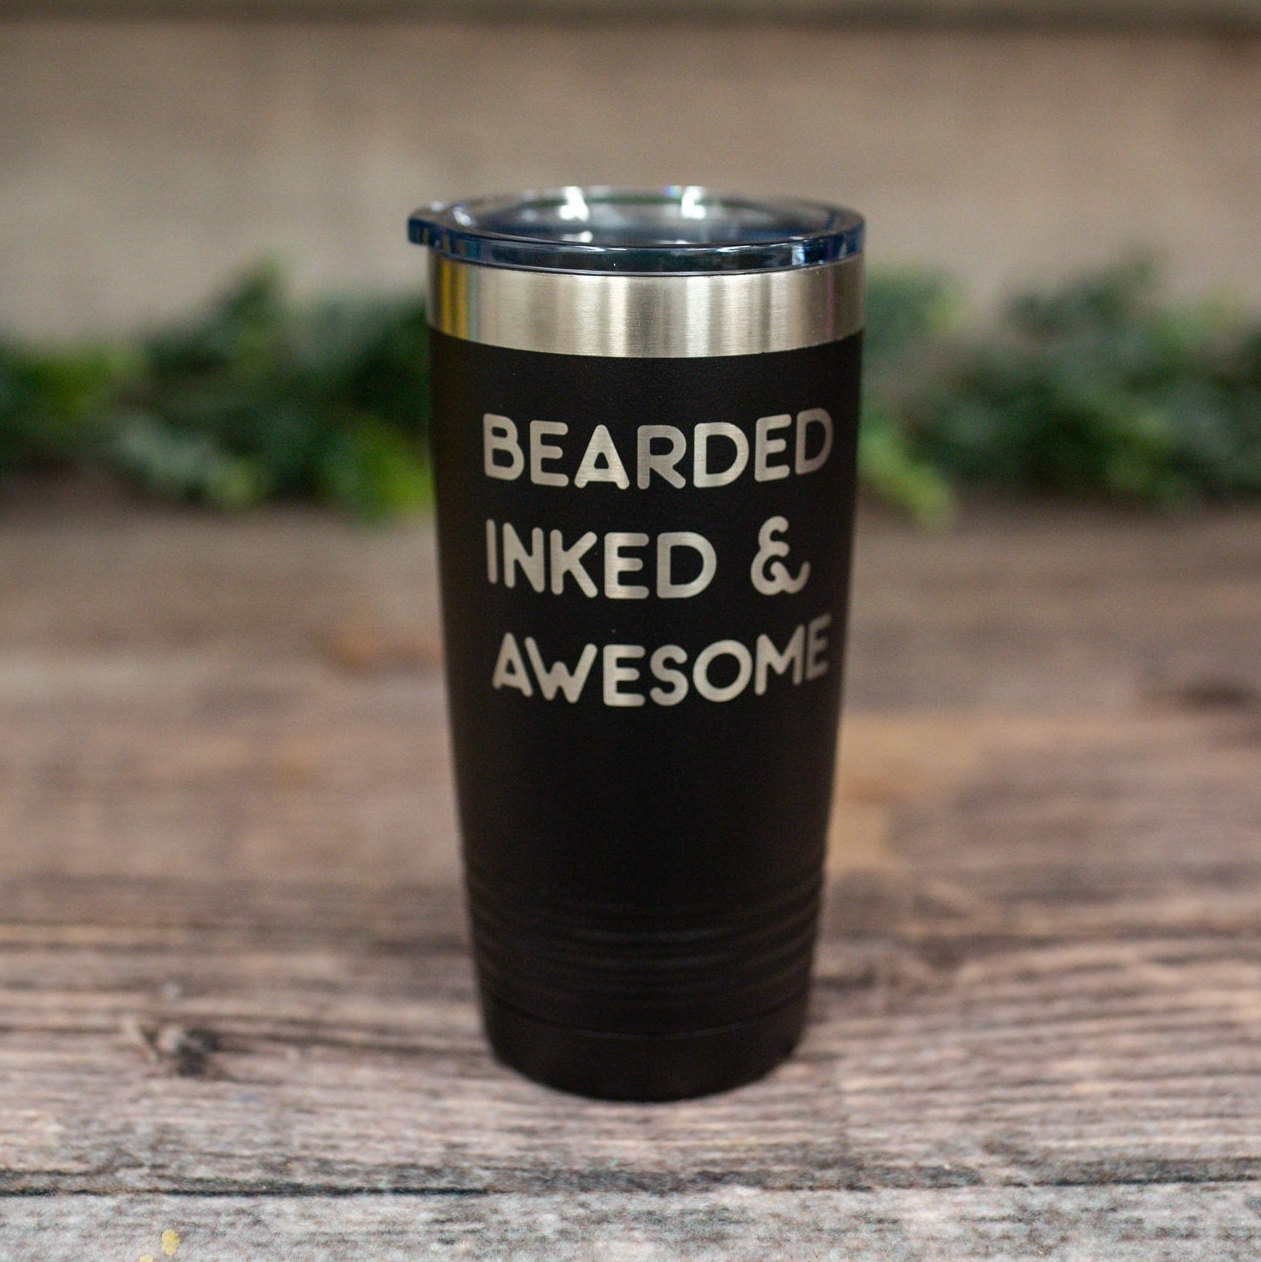 https://3cetching.com/wp-content/uploads/2021/07/bearded-inked-awesome-engraved-stainless-steel-tumbler-funny-tumbler-mug-for-him-tattoo-tumbler-60f74a14.jpg